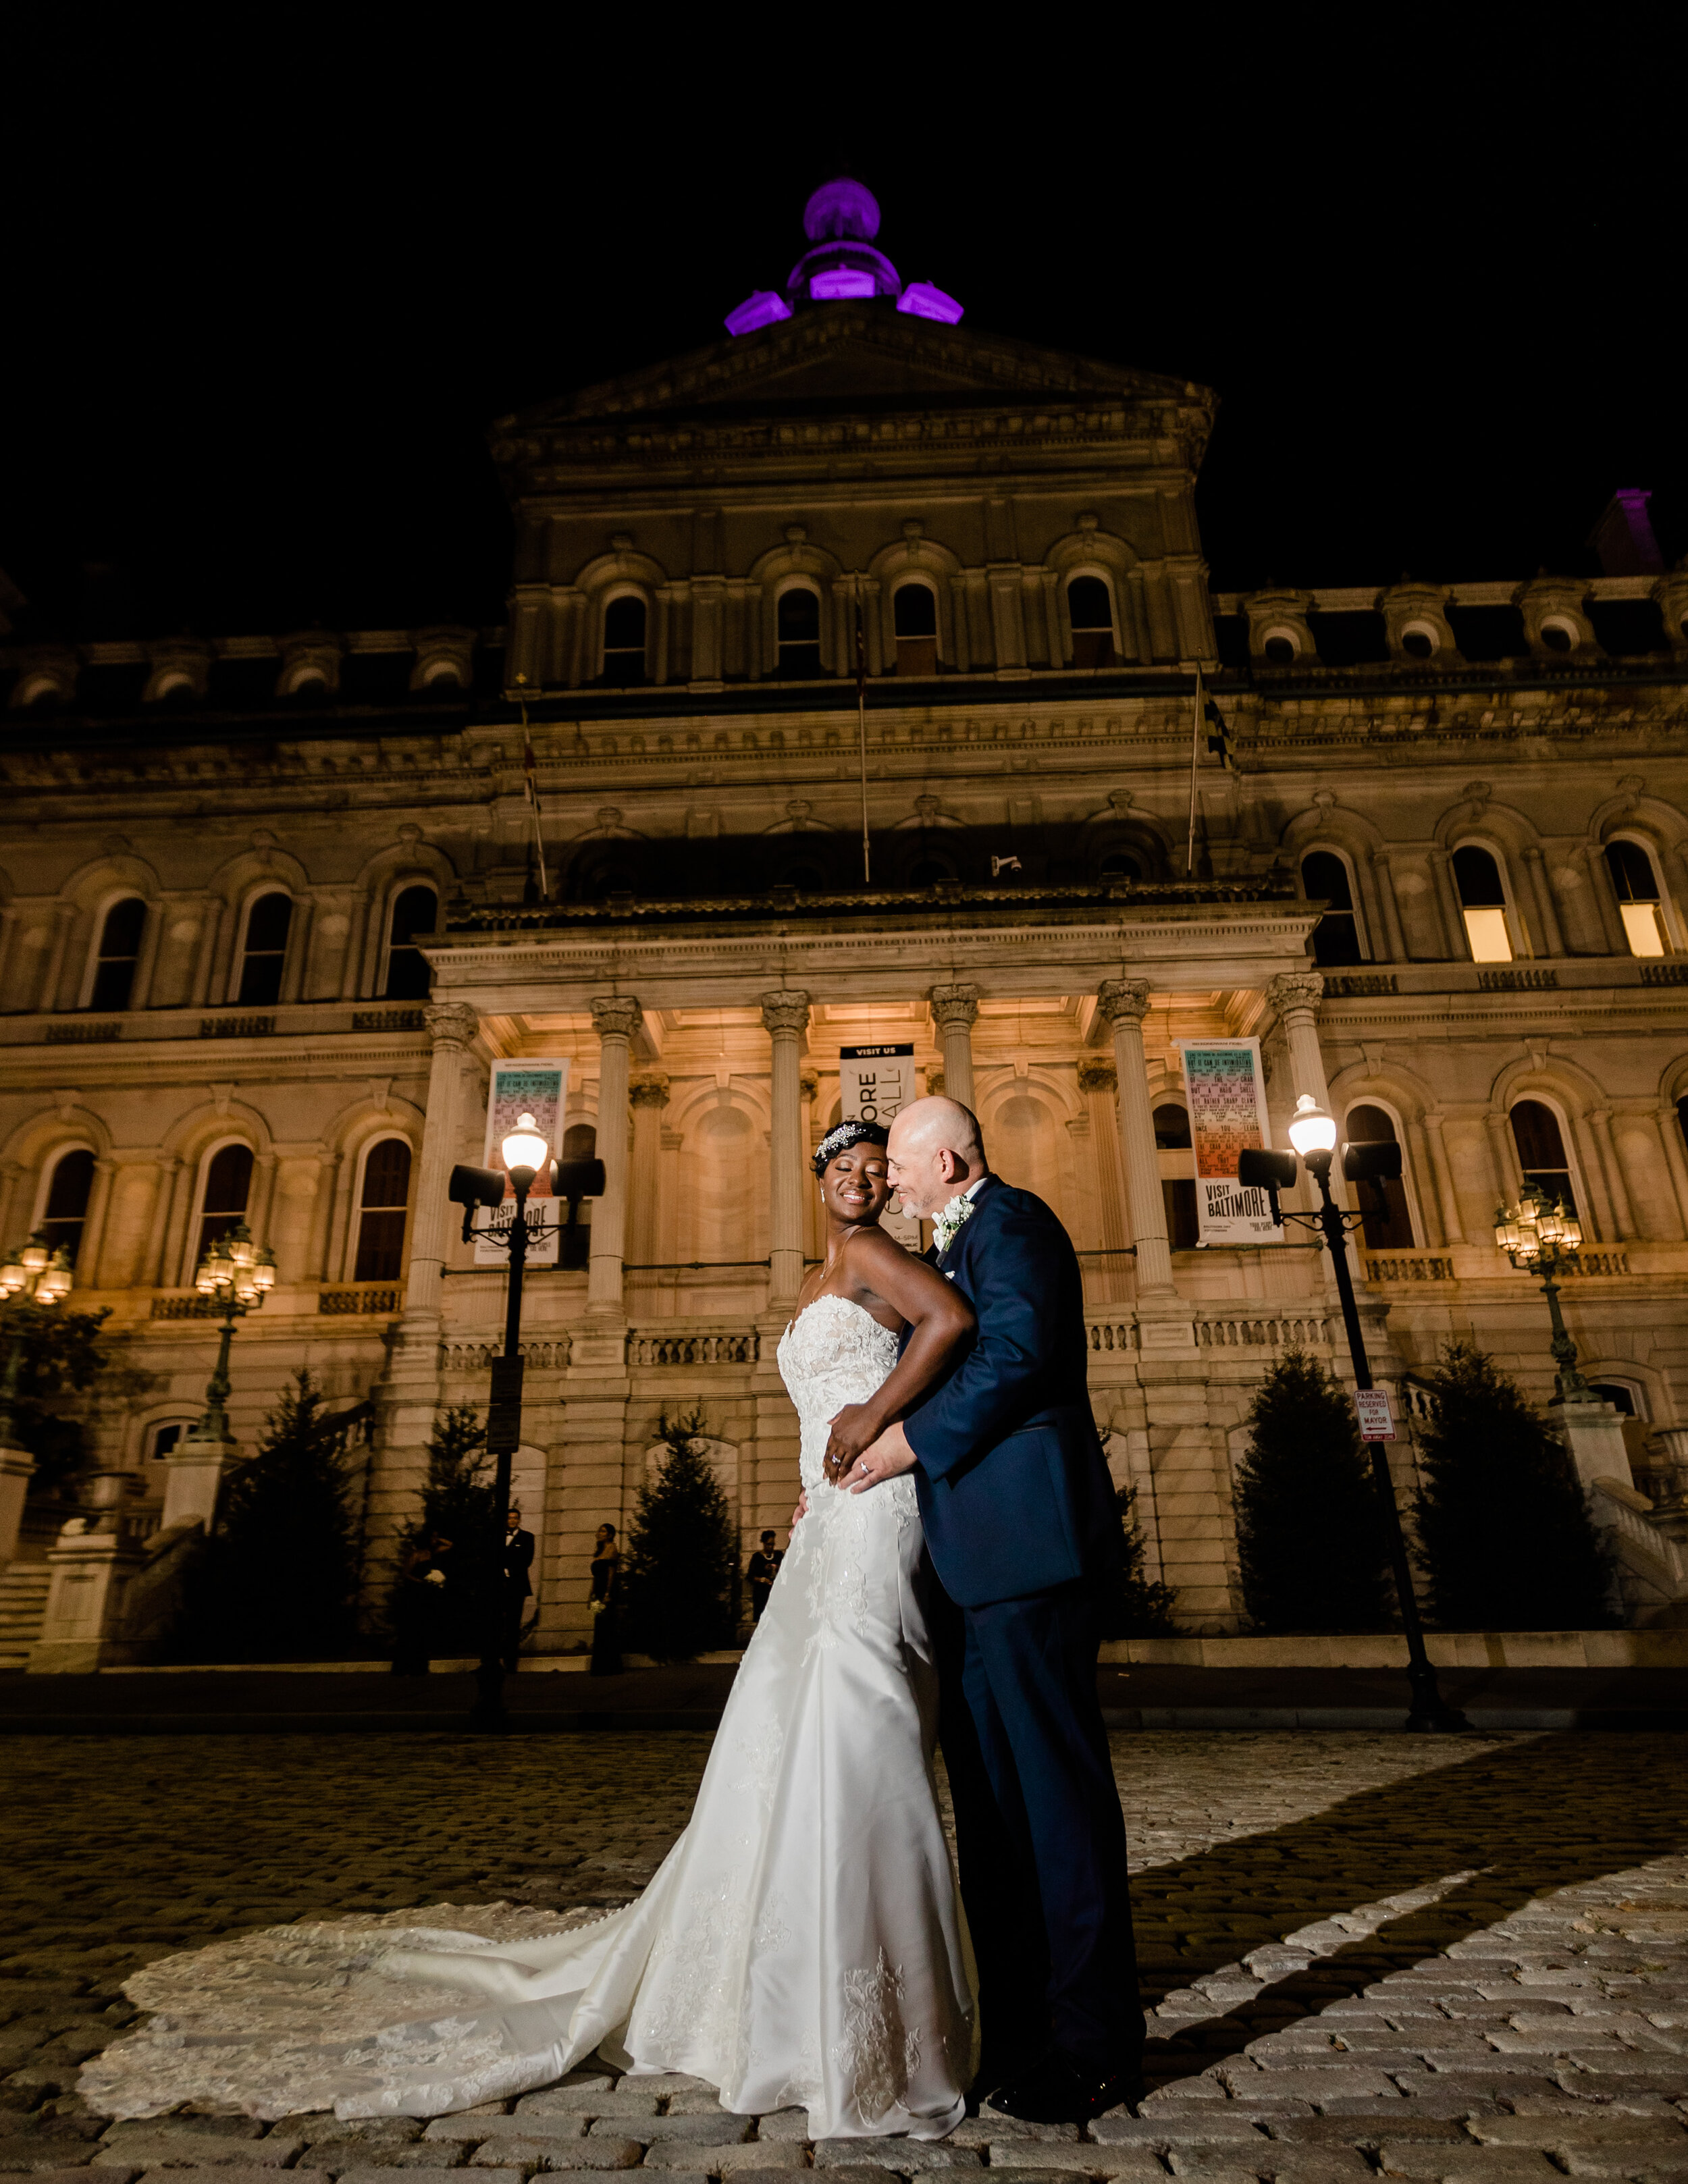 get married in baltimore city hall shot by megapixels media biracial couple wedding photographers maryland-99.jpg